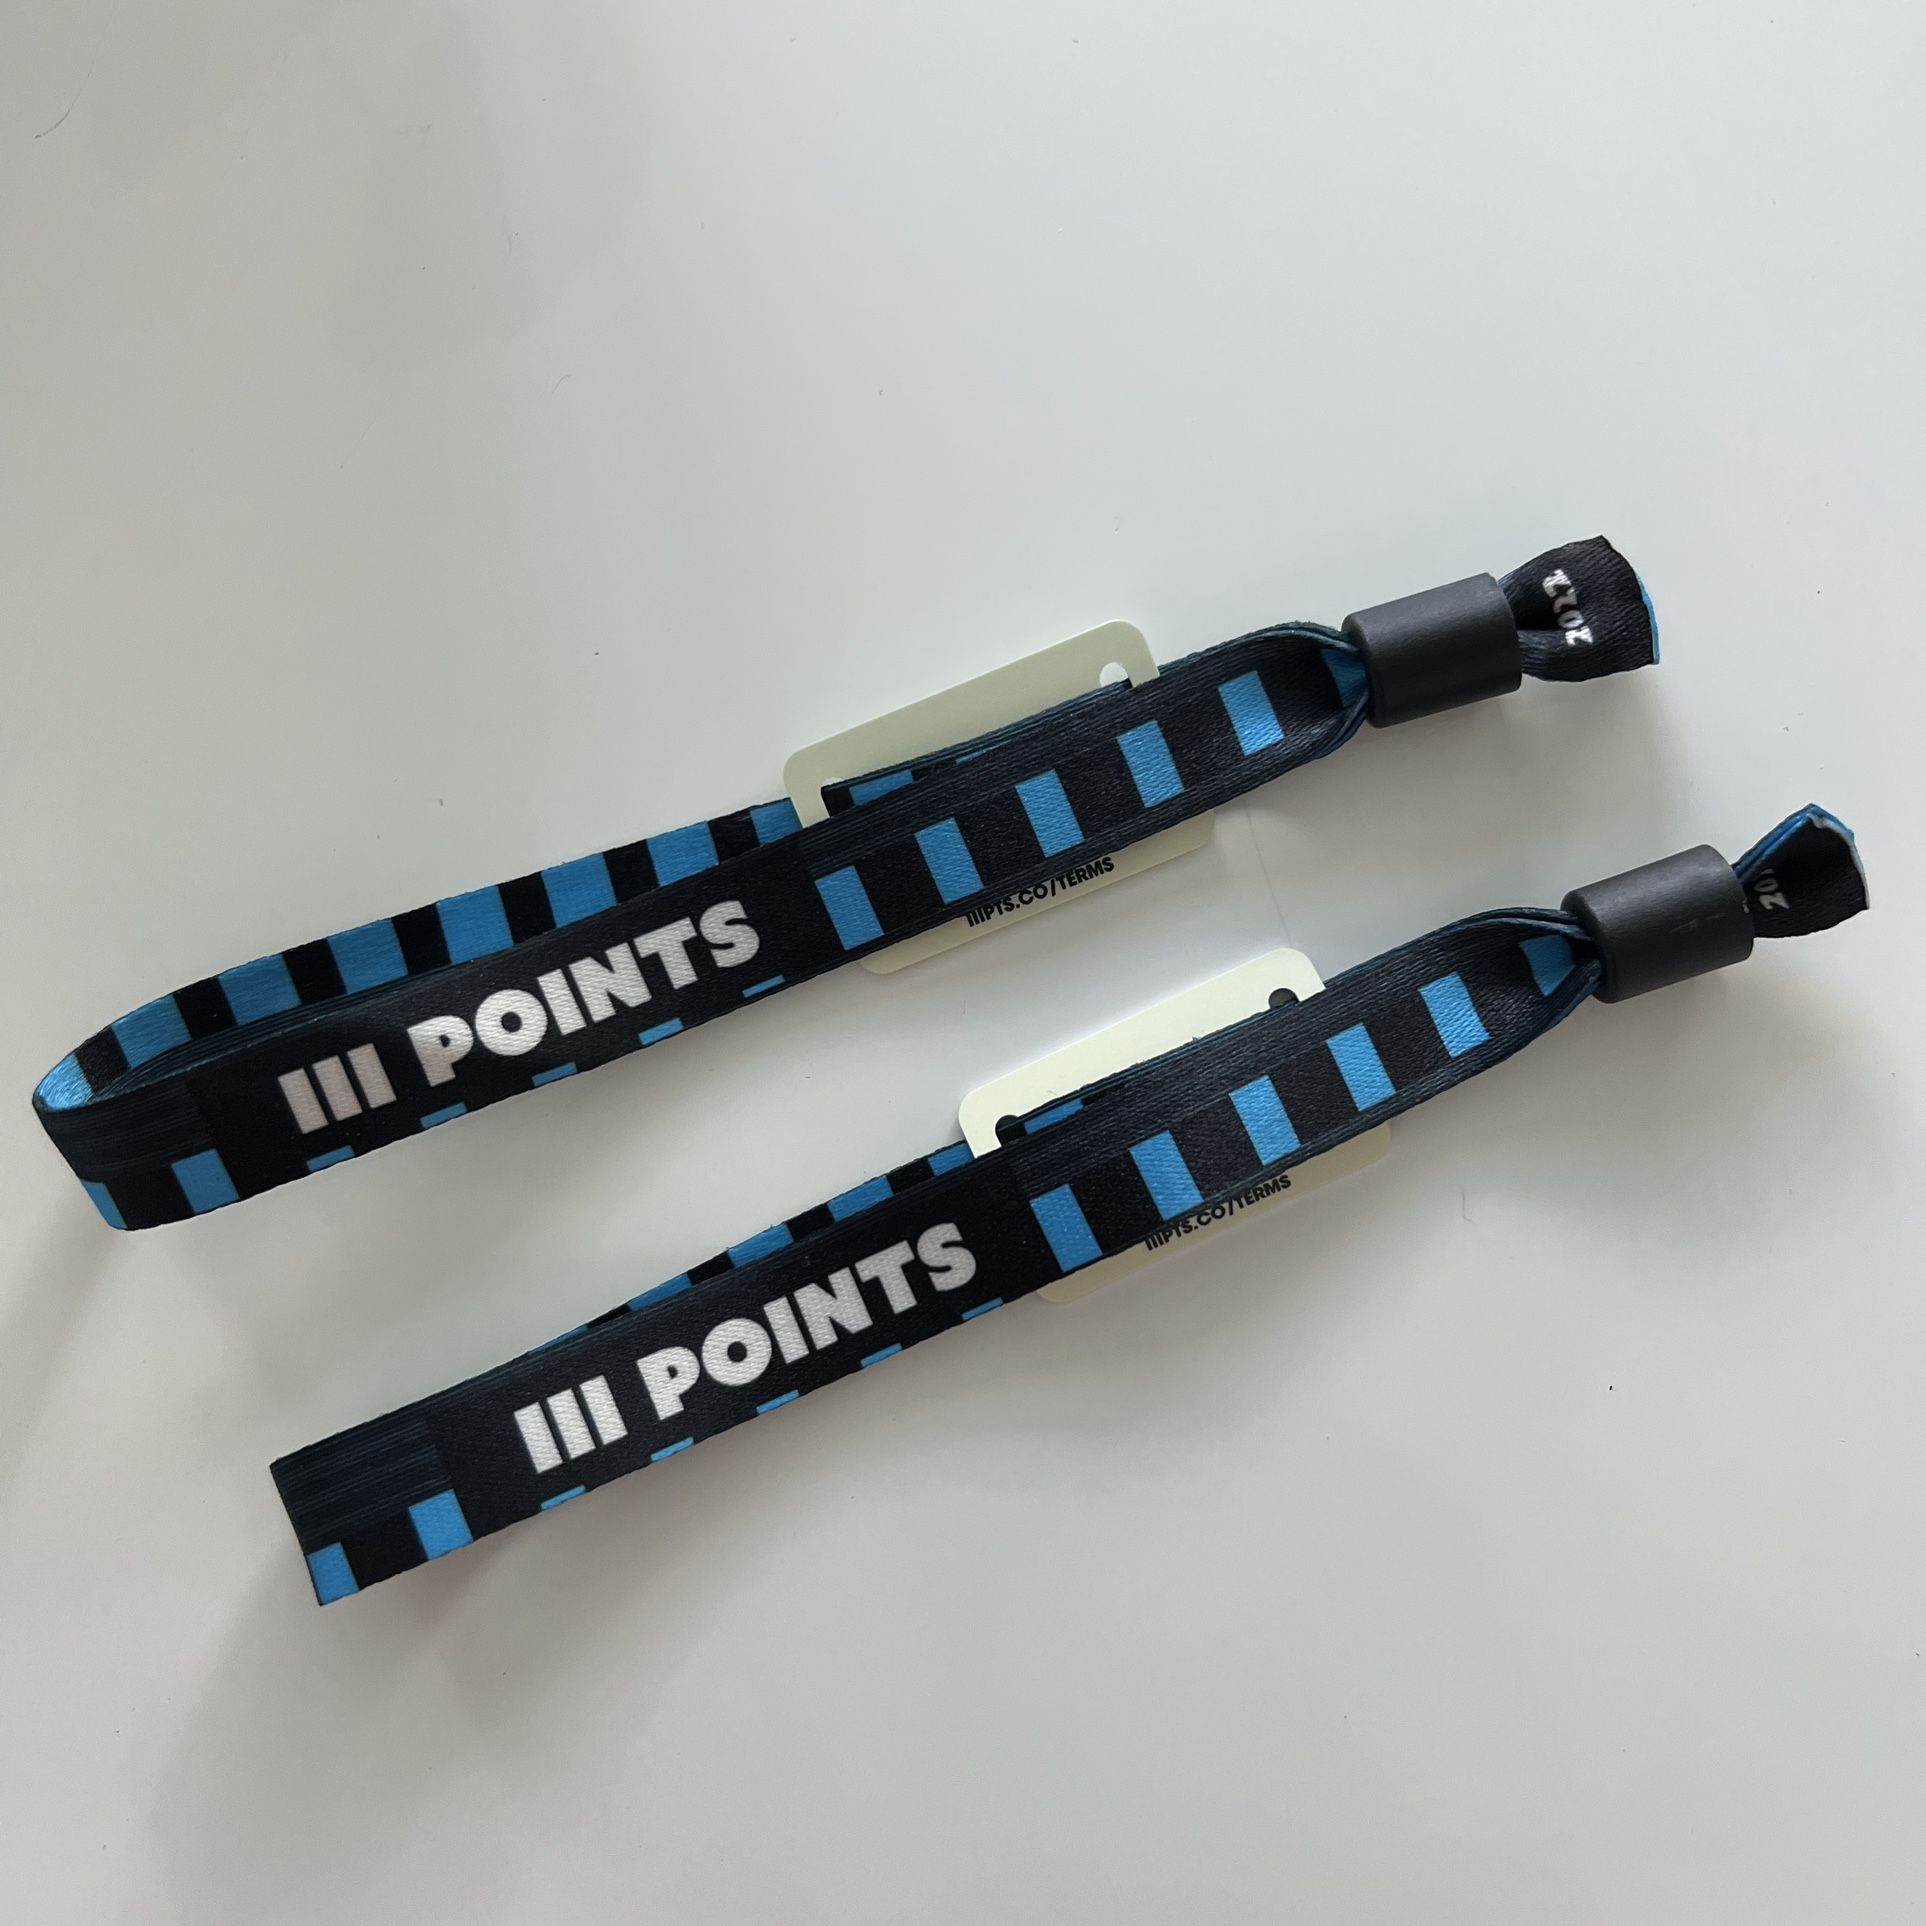 Two Tickets iii Points / 3 Points Festival Tickets 